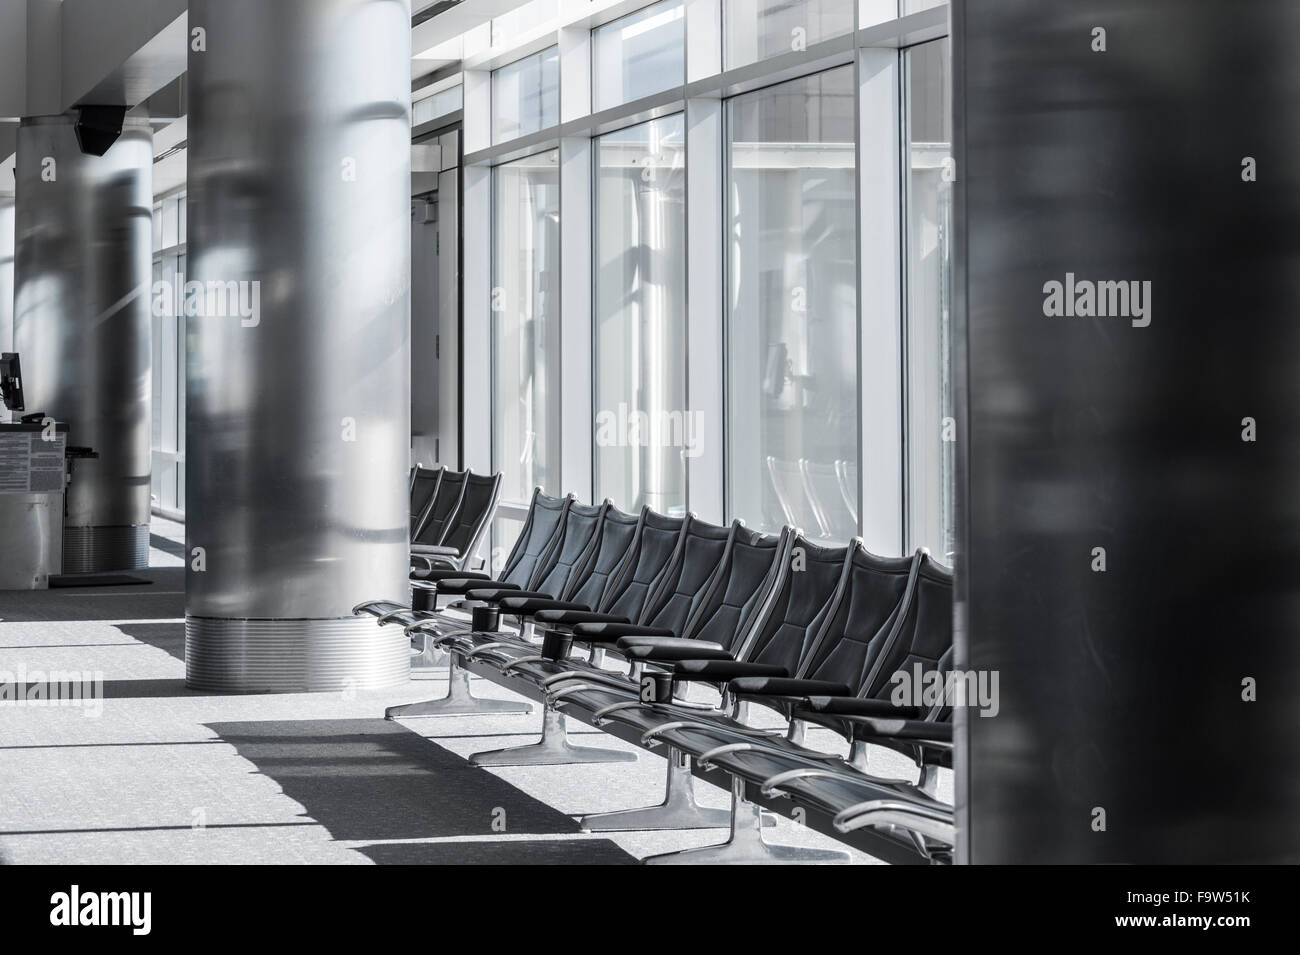 Empty Seats At Airport Gate Waiting Area With Windows, Denver Colorado, USA Stock Photo